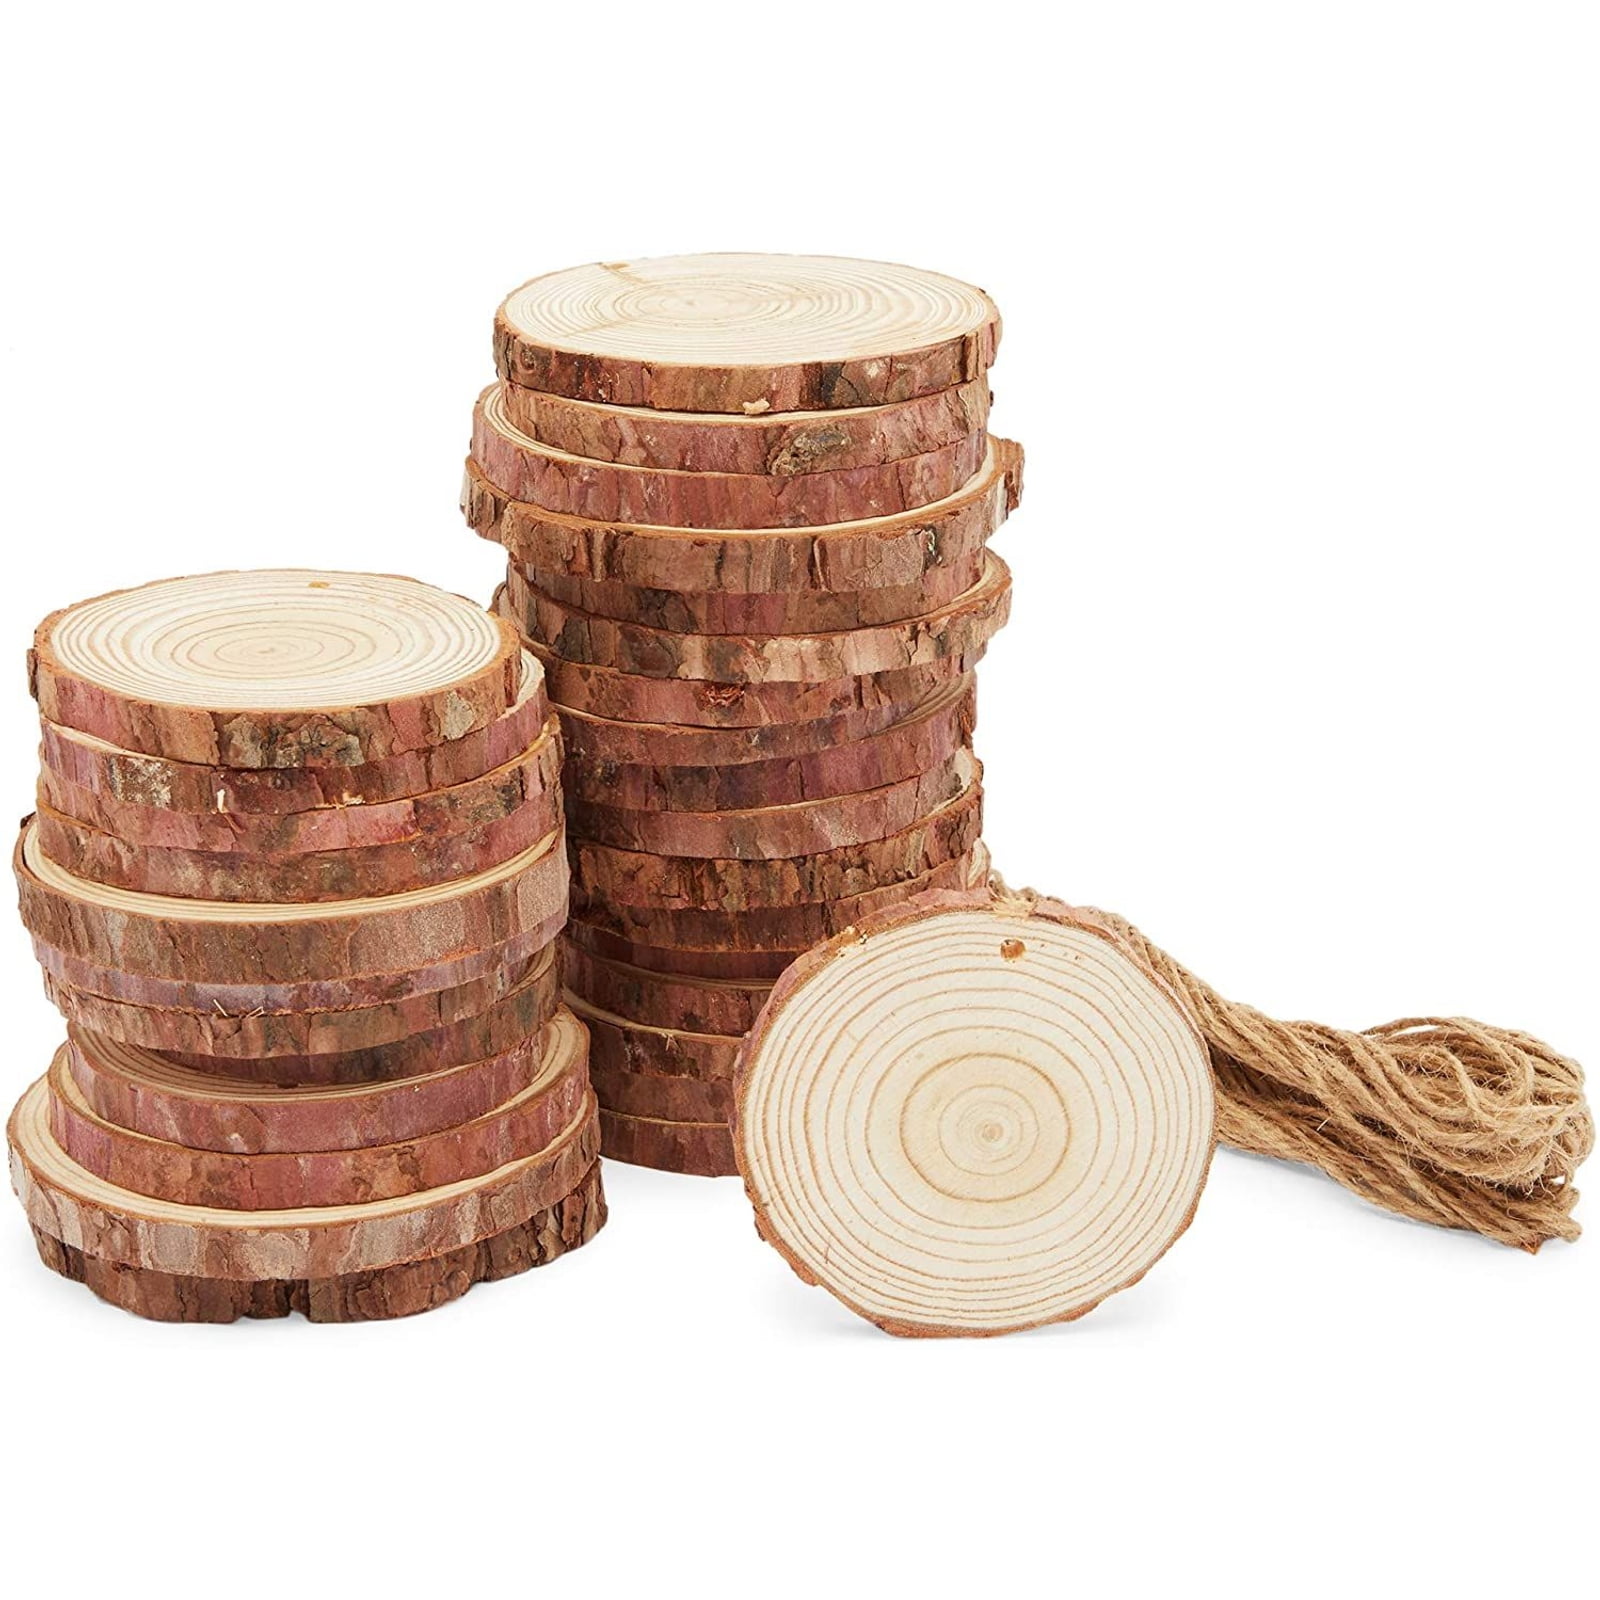 Wedding Ornaments DIY Craft 20Pcs Natural Wood Slices 2.36-2.7 inches Predrilled Unfinished Log Wooden Circles with Holes and Bark forChristmas Decoration Includes Jute Twines